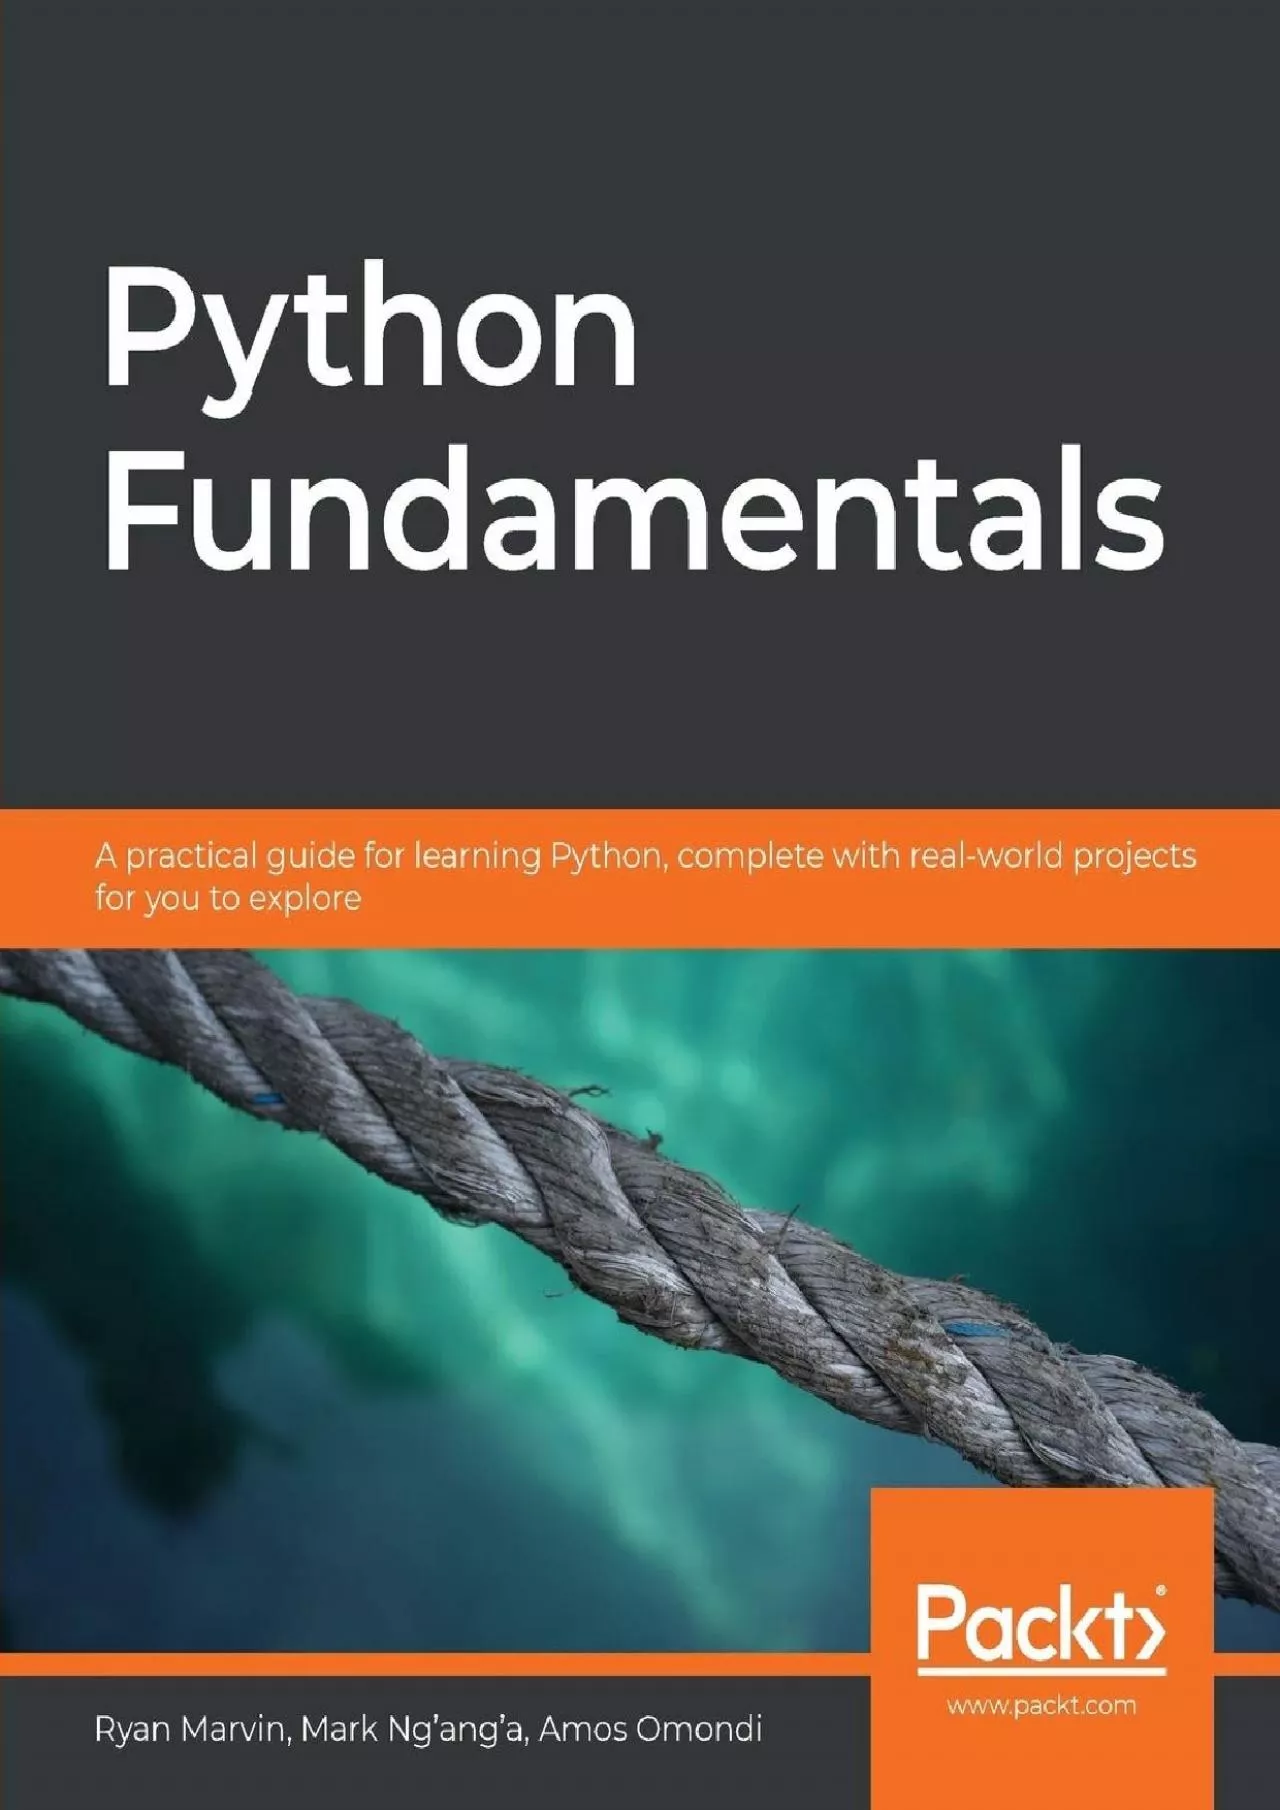 [READING BOOK]-Python Fundamentals A practical guide for learning Python, complete with